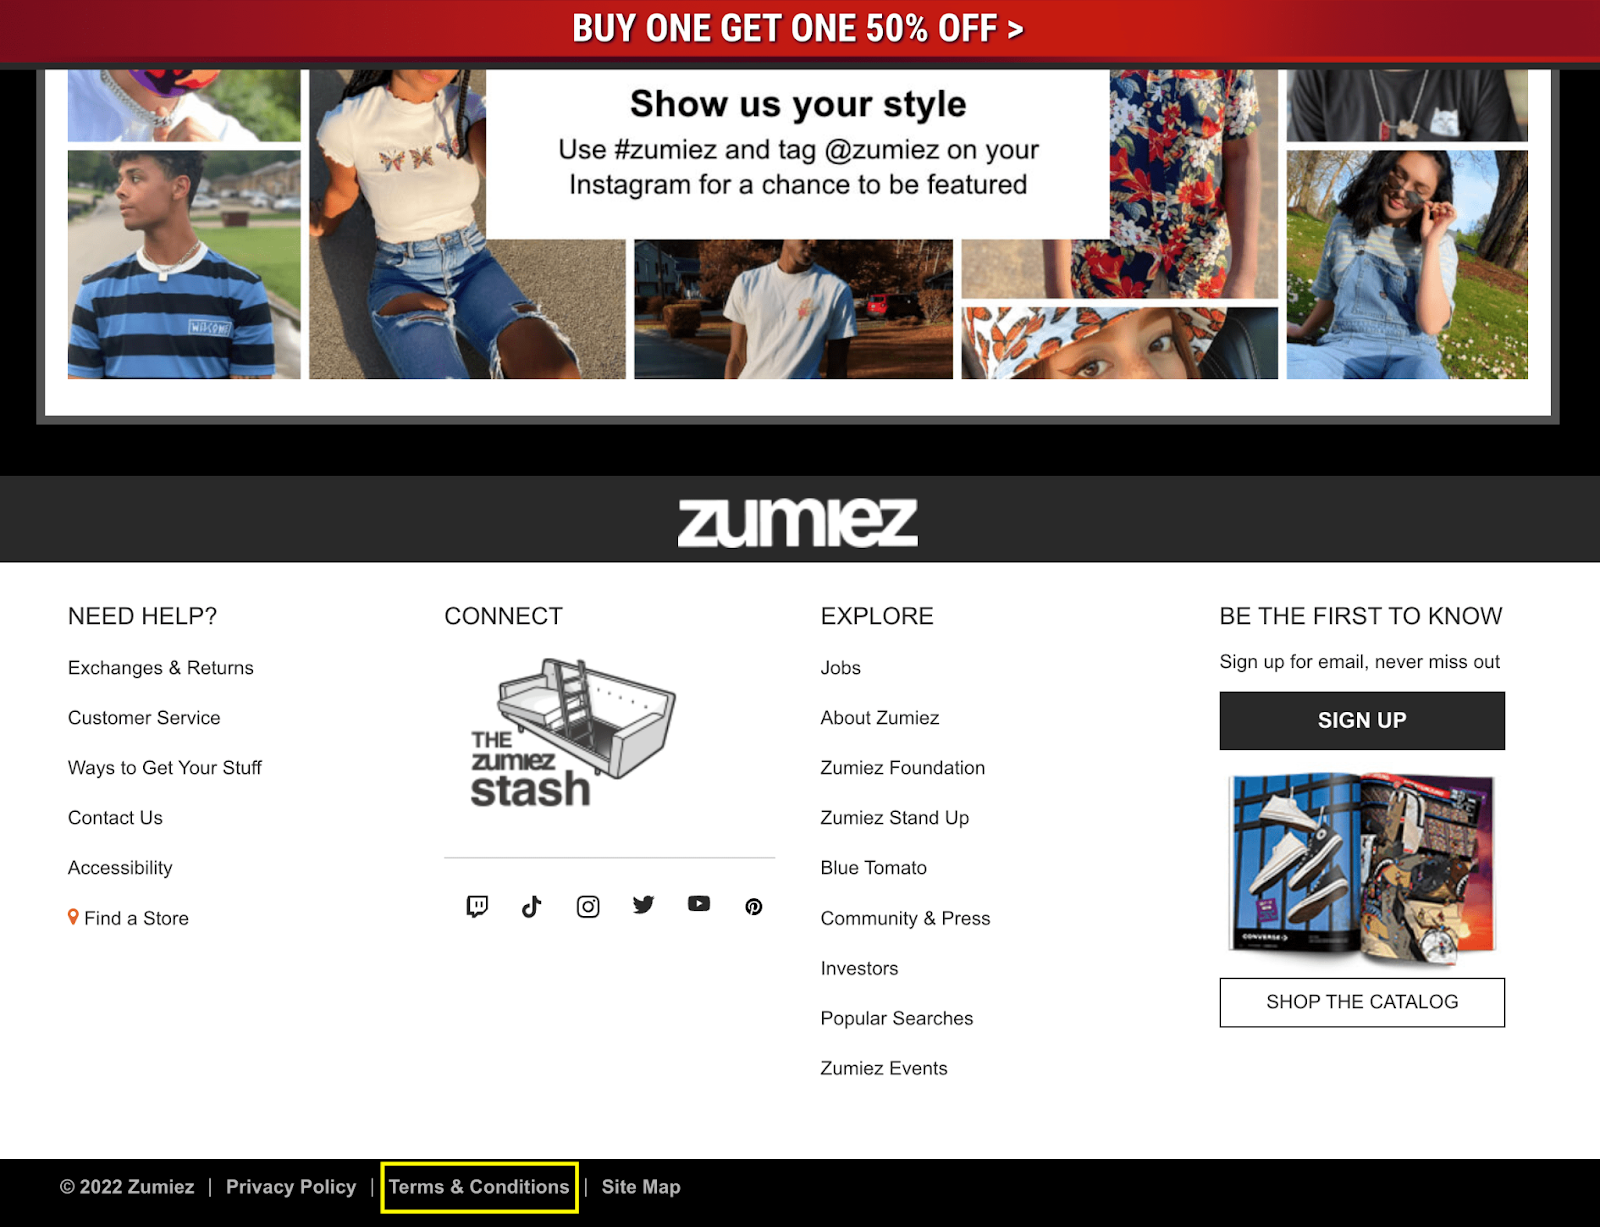 Terms & Conditions links are typically found in the website footer, such as Zumiez.